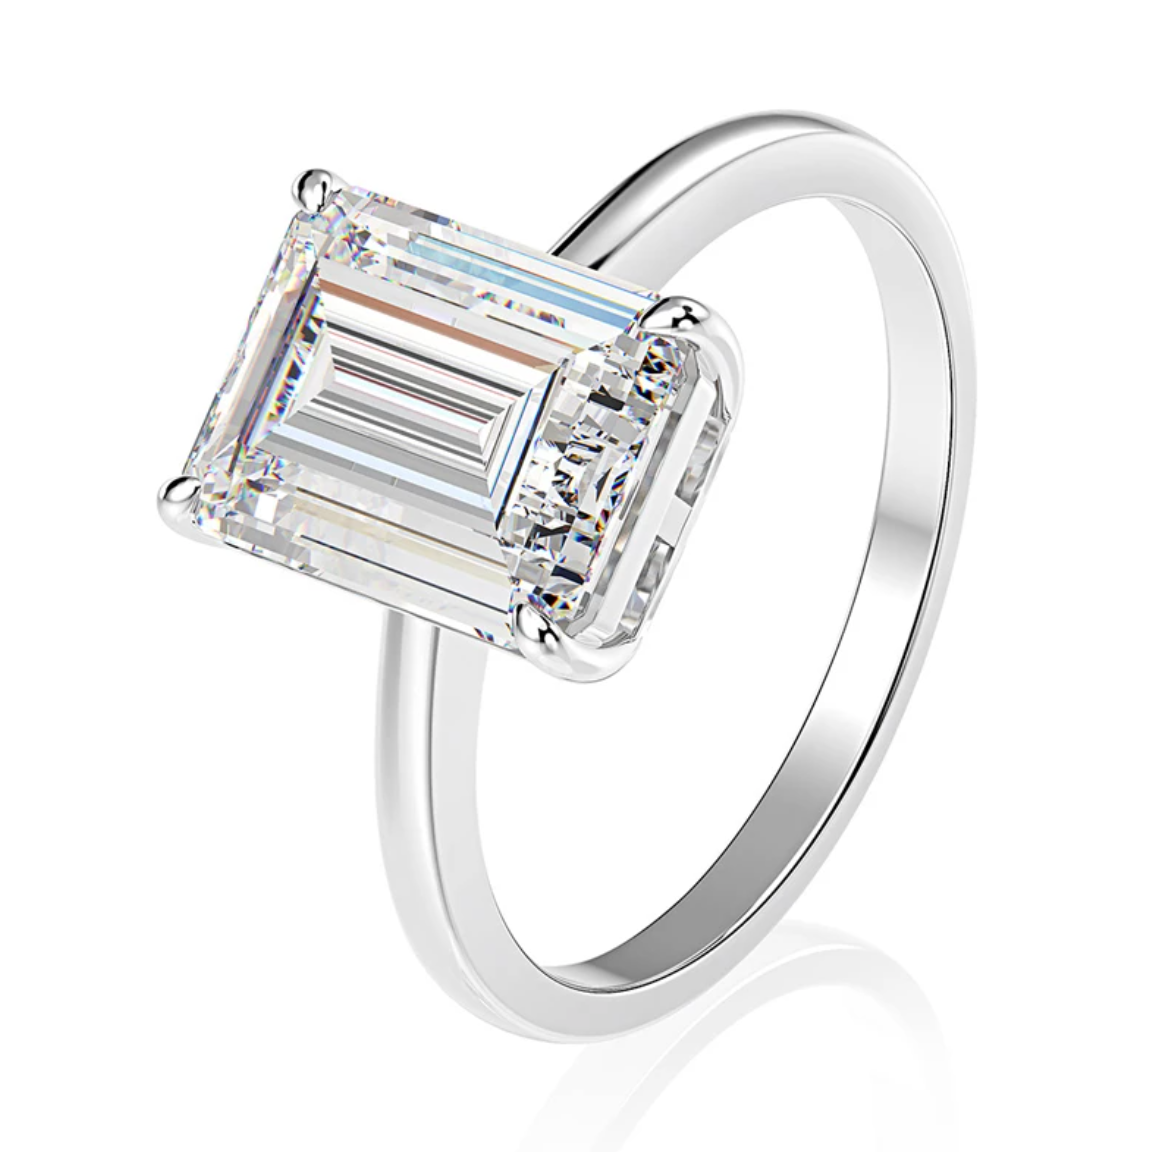 Sofia Richie Grainge 4 Carat Emerald Cut Diamond Engagement Ring Dupe on  Sterling Silver band by Margalit Rings – MargalitRings